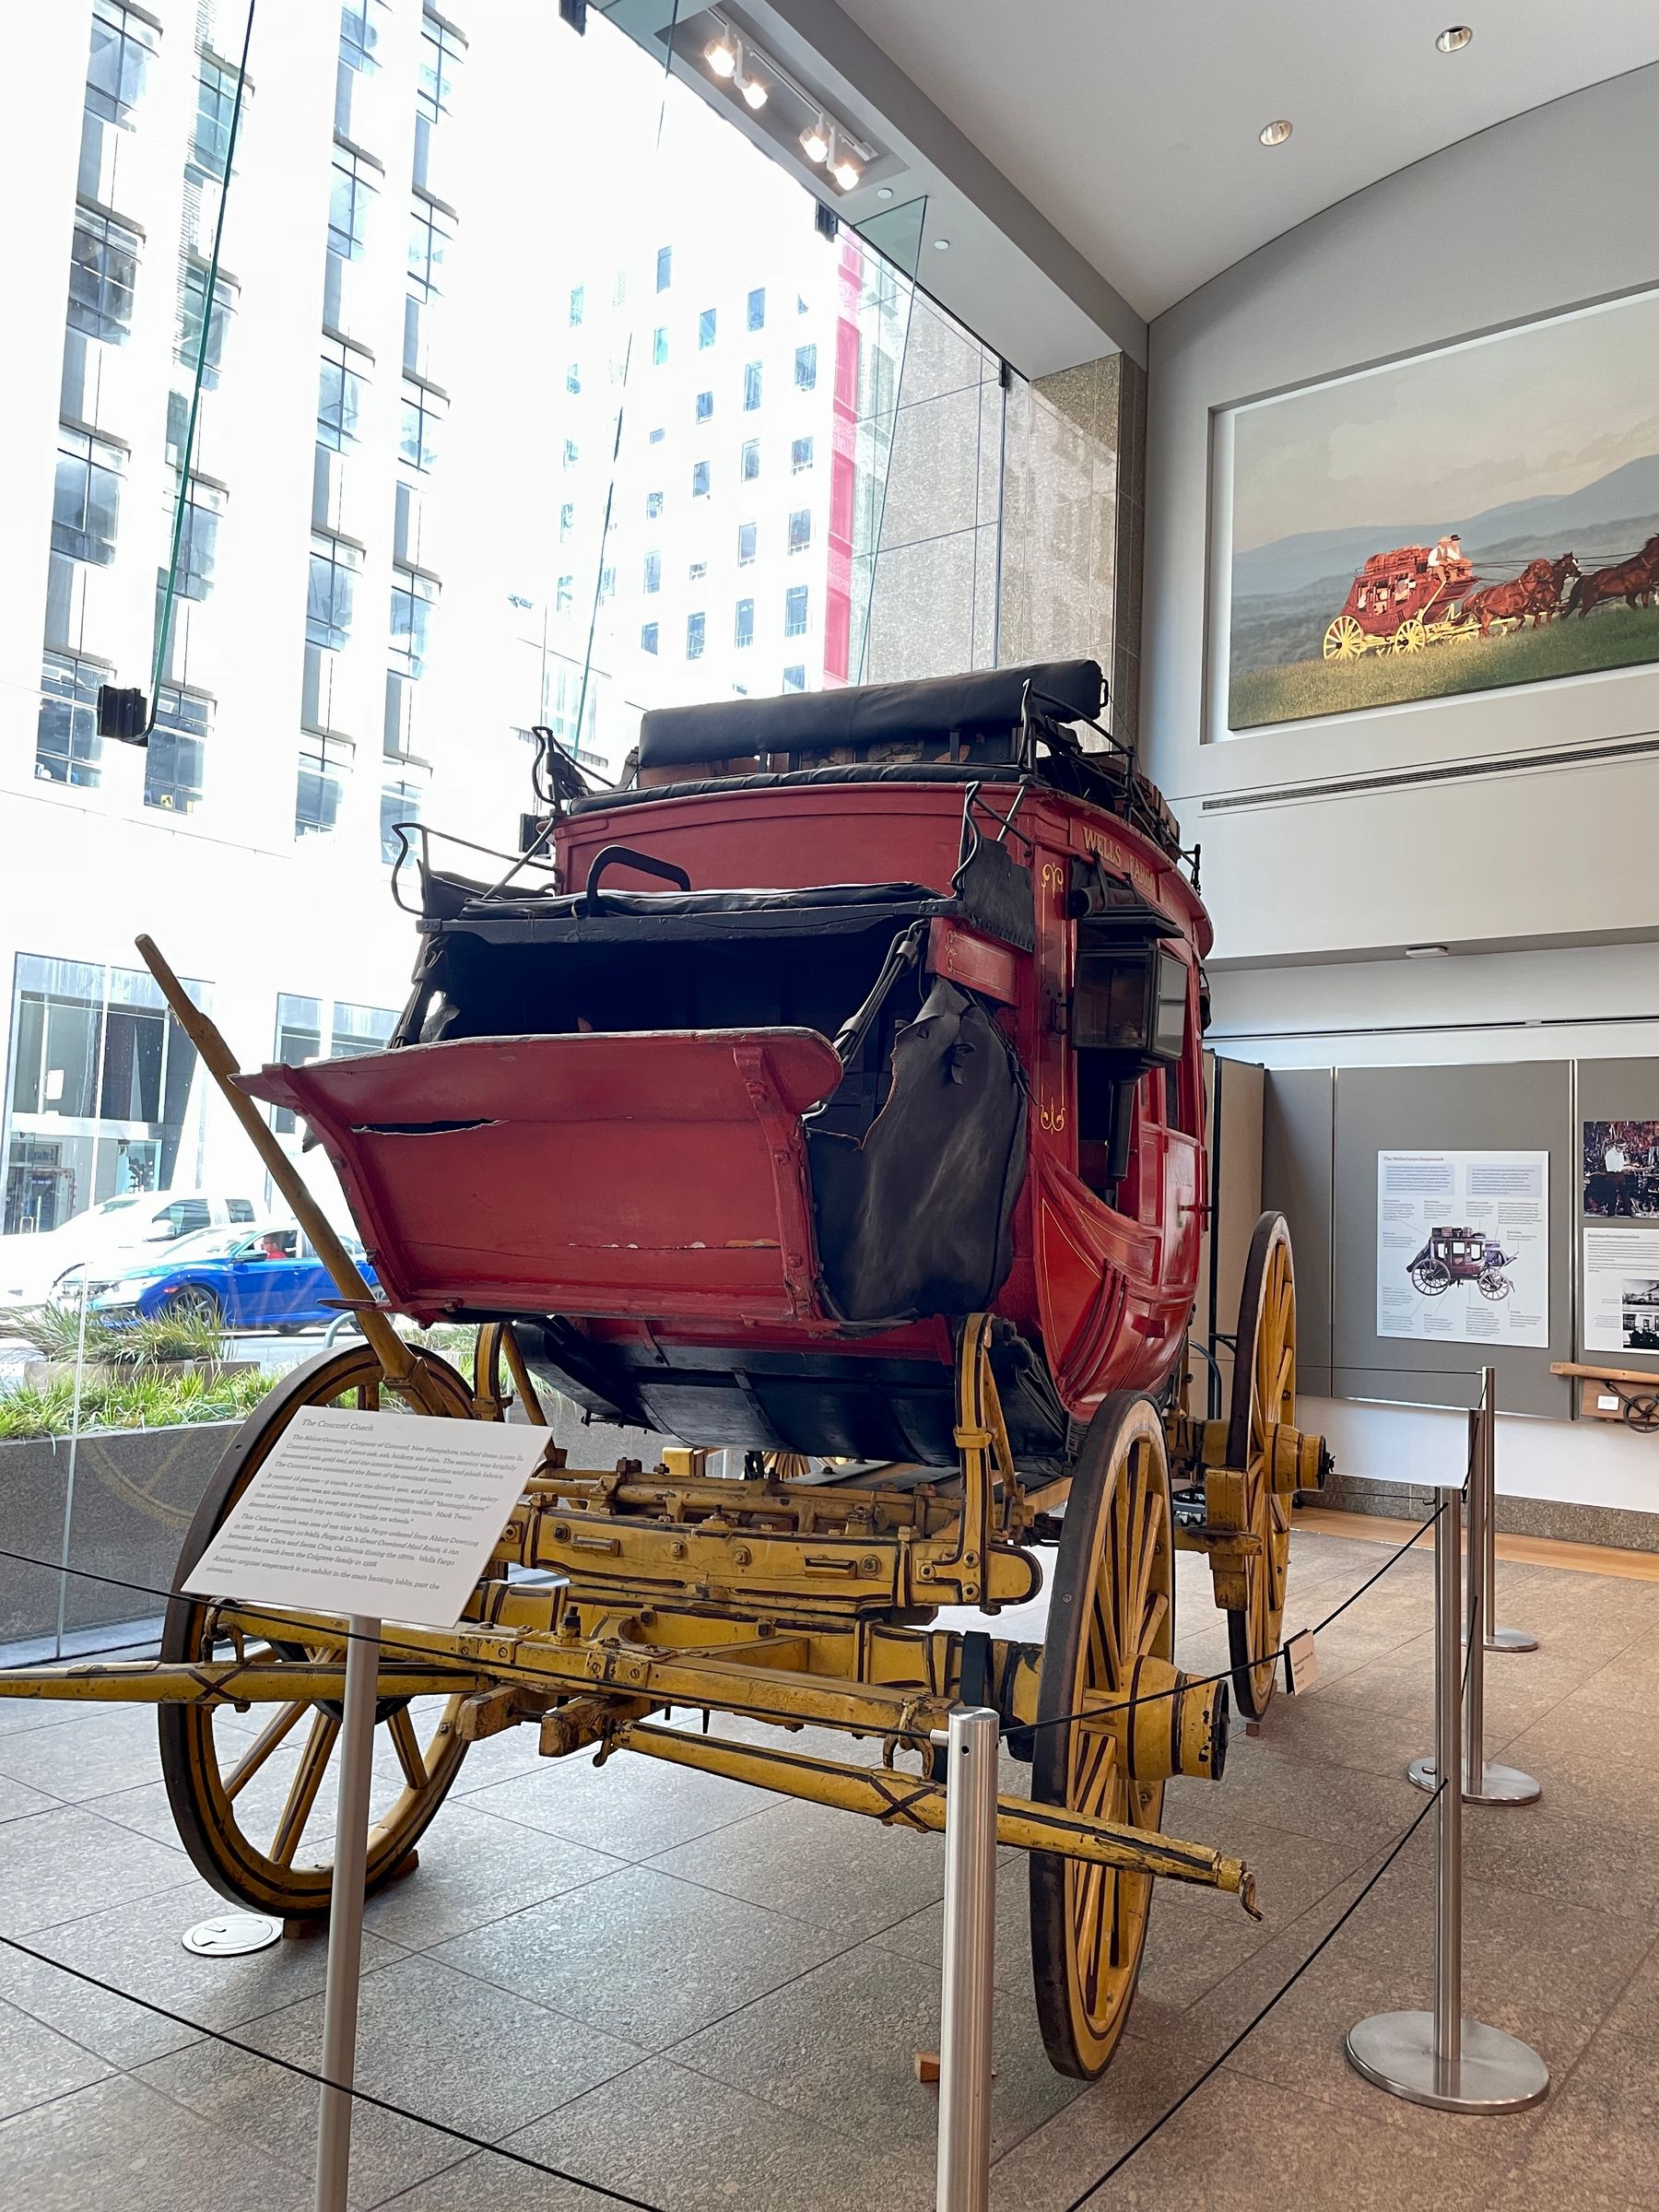 Wells Fargo Museum - Free Museum Day | Downtown San Francisco